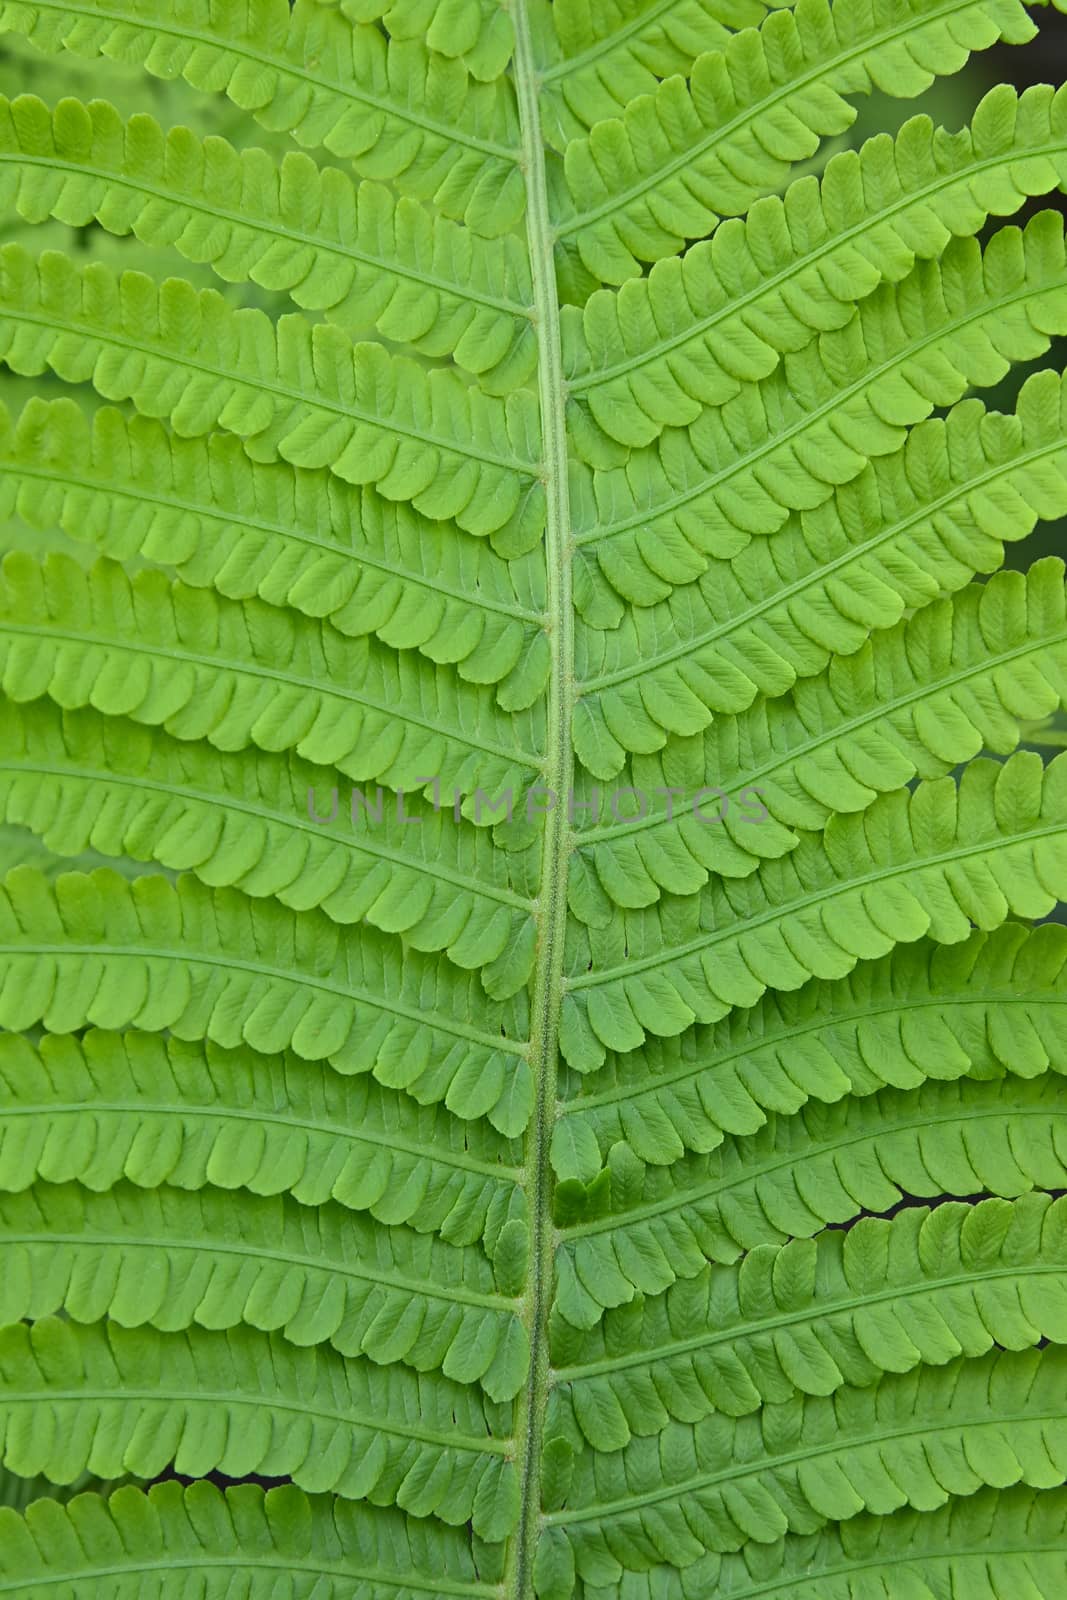 Close up fresh green fern frond and leaves over green background, low angle view